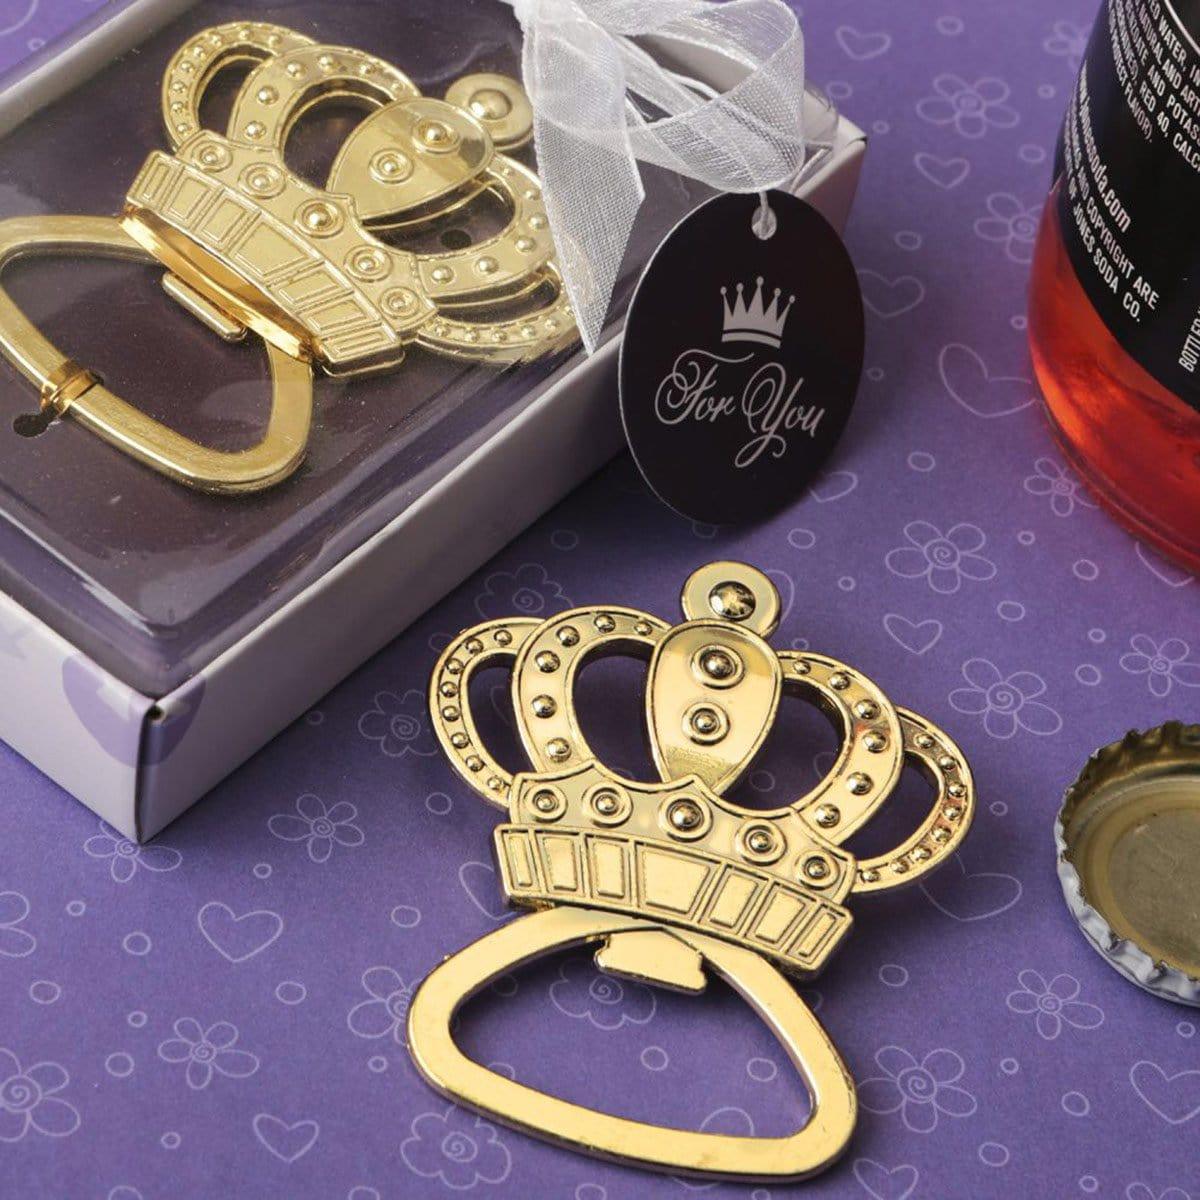 Buy Wedding Crown Bottle Opener - Gold sold at Party Expert